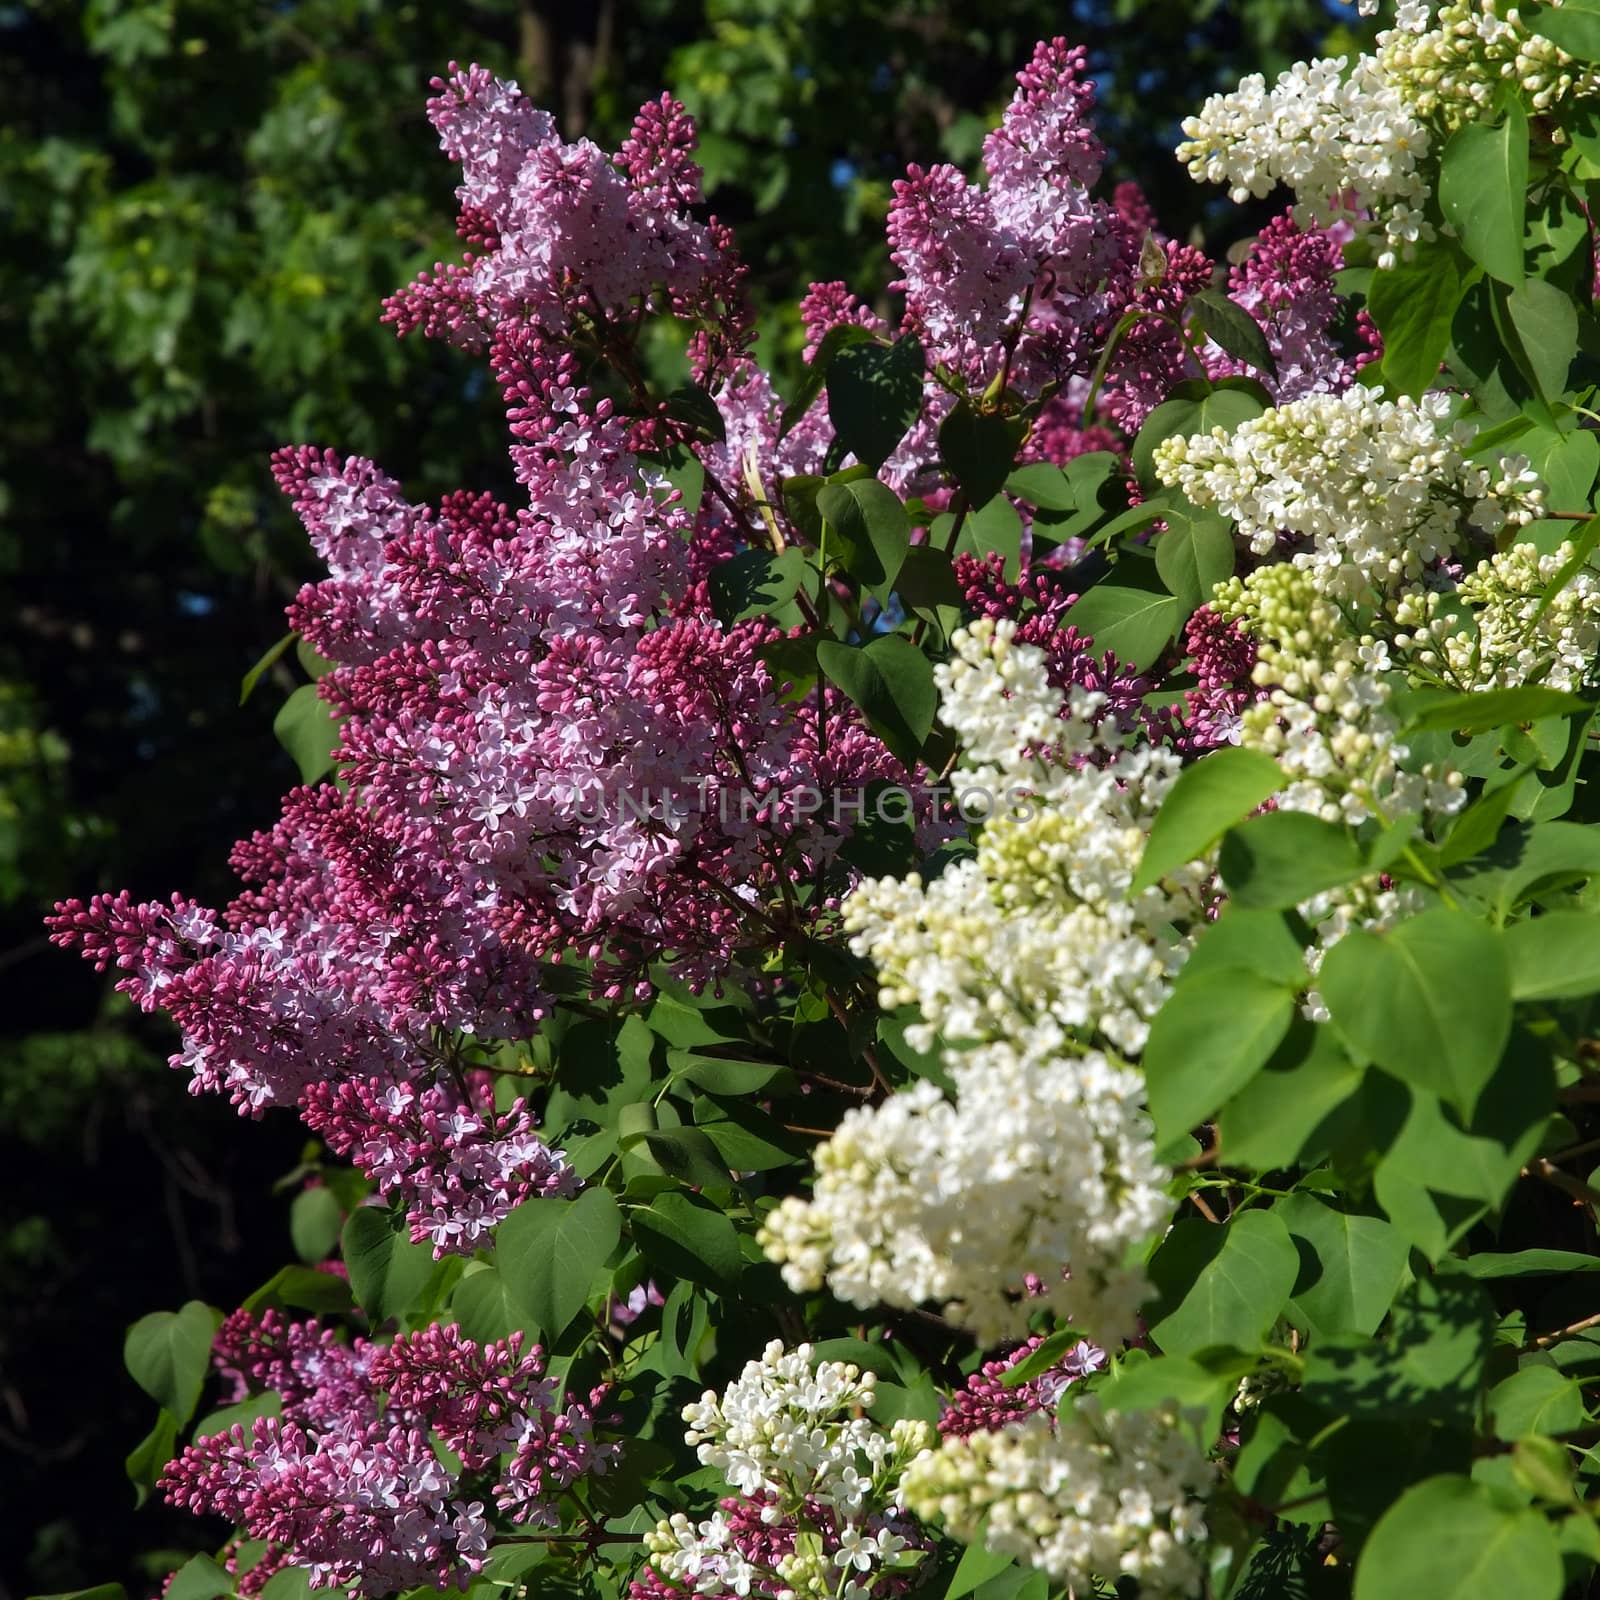 Purple and White Lilac by petr_malyshev